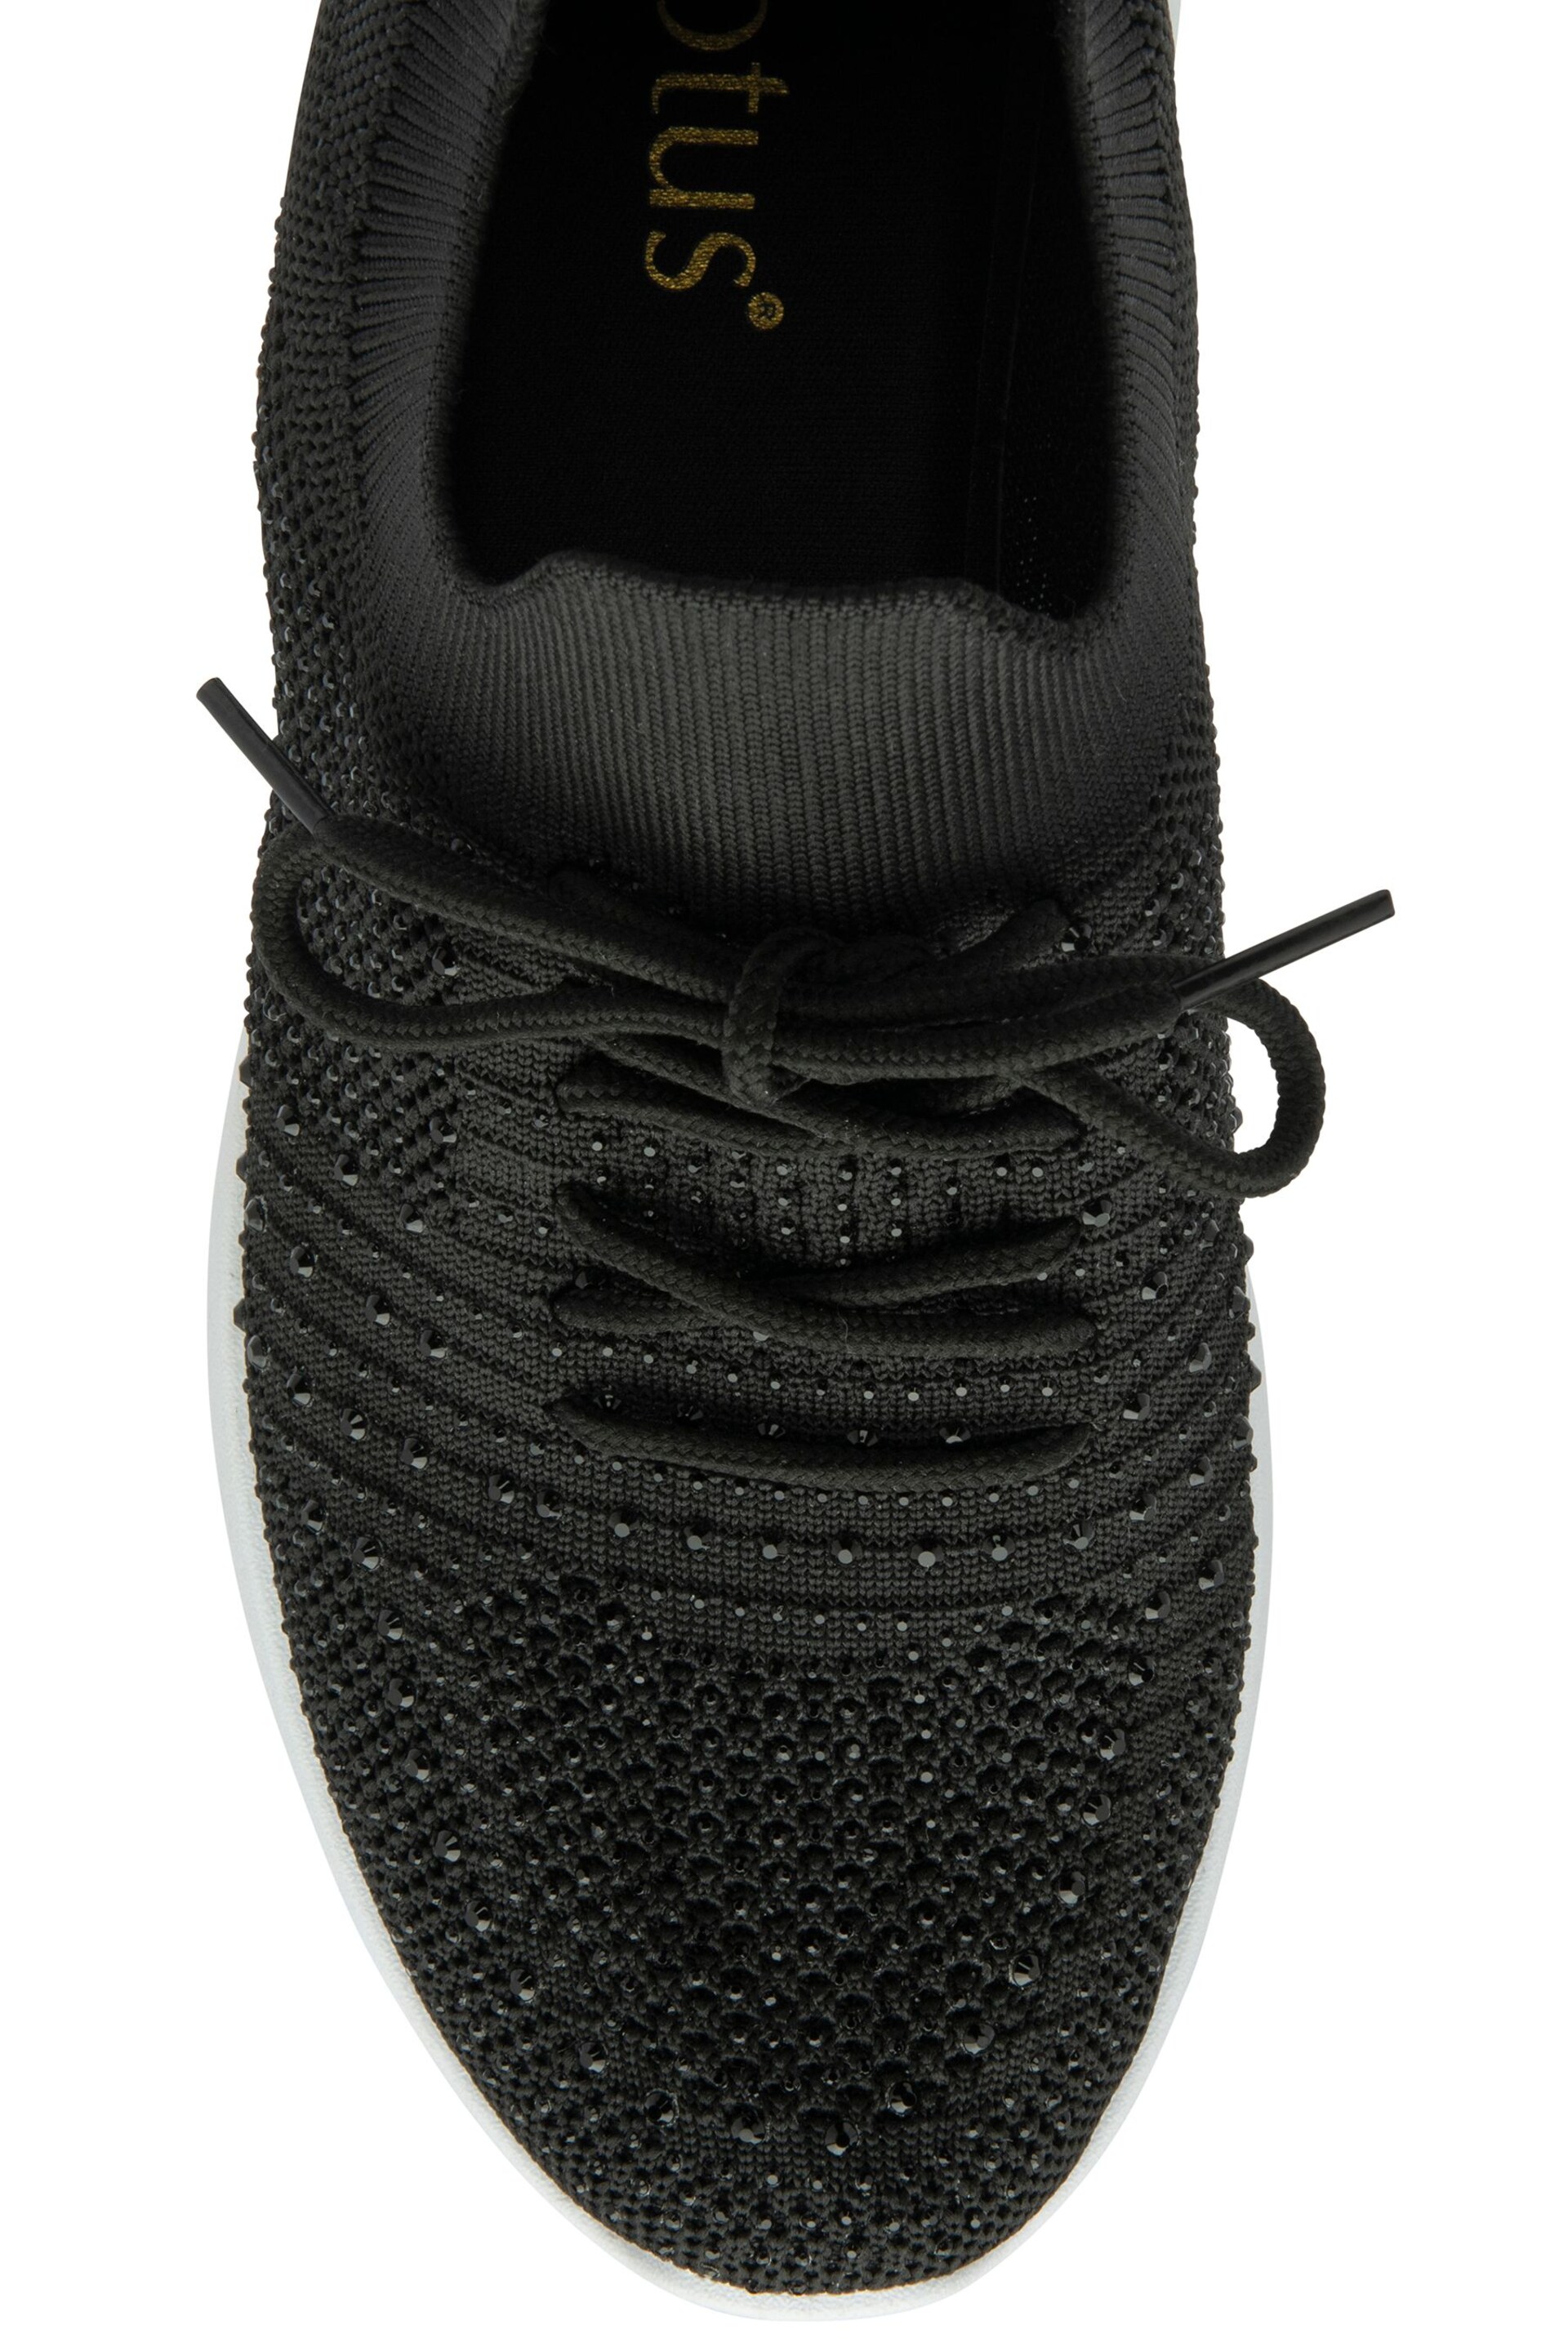 Lotus Black Casual Knit Trainers - Image 4 of 4